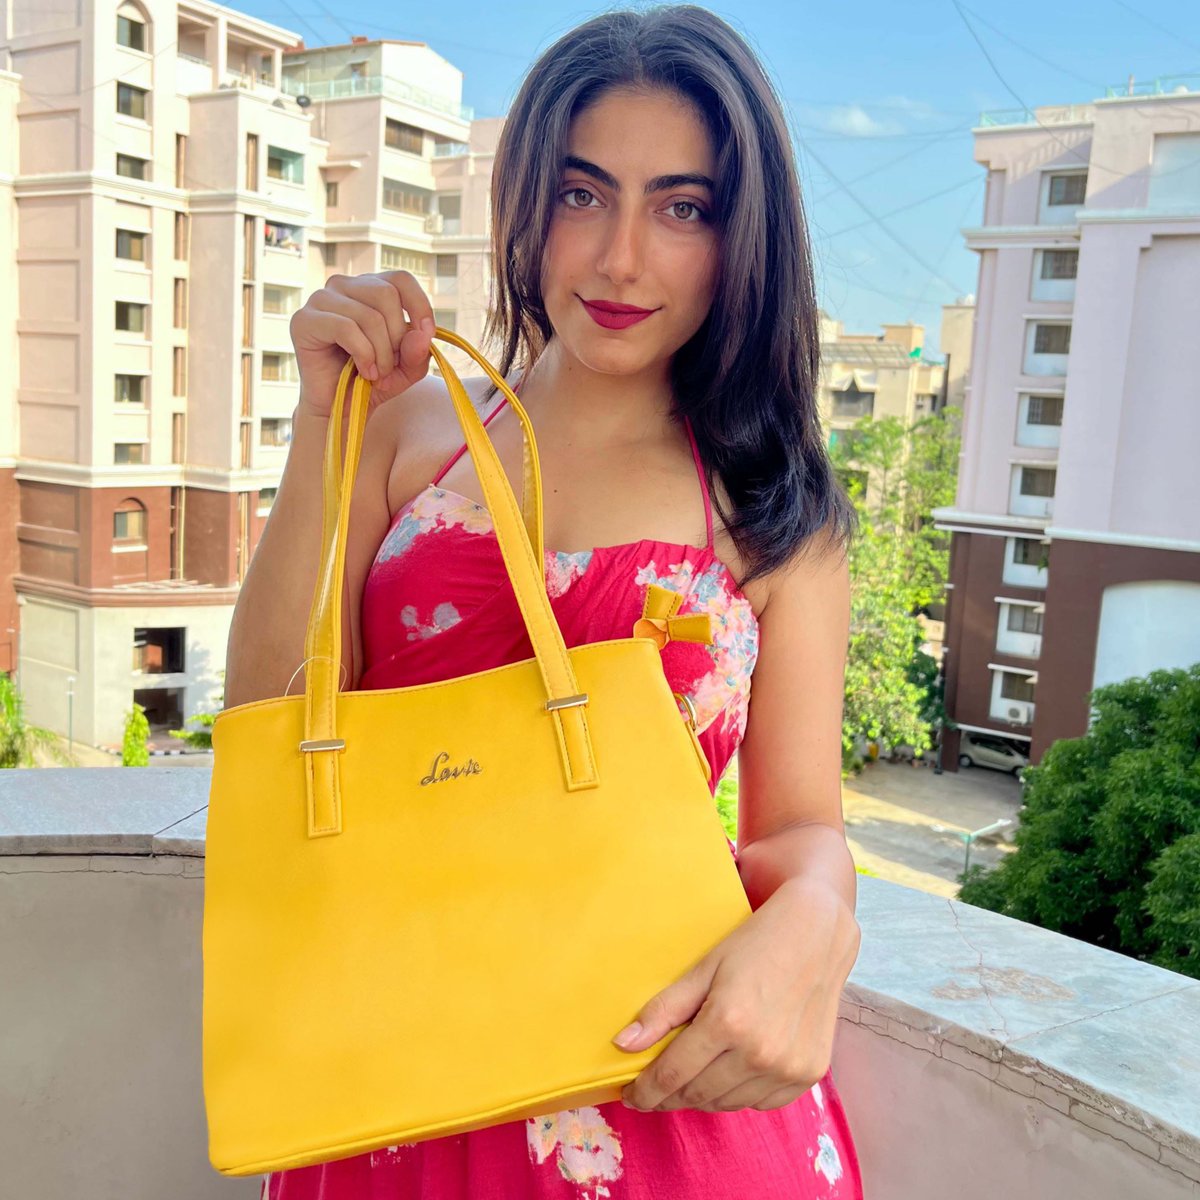 ✨#GIVEAWAY ALERT ✨ A lil colour therapy never hurt nobody 🤩 . Follow these steps to win a GORGEOUS #laviebag 👜 1️⃣ Like & save the last 3 post 2️⃣ Follow @lavieworld ✨ 3️⃣ Tell us how would you style our ocher #Odiase satchel 💛 4️⃣ Tag 3 friends & ask them to participate